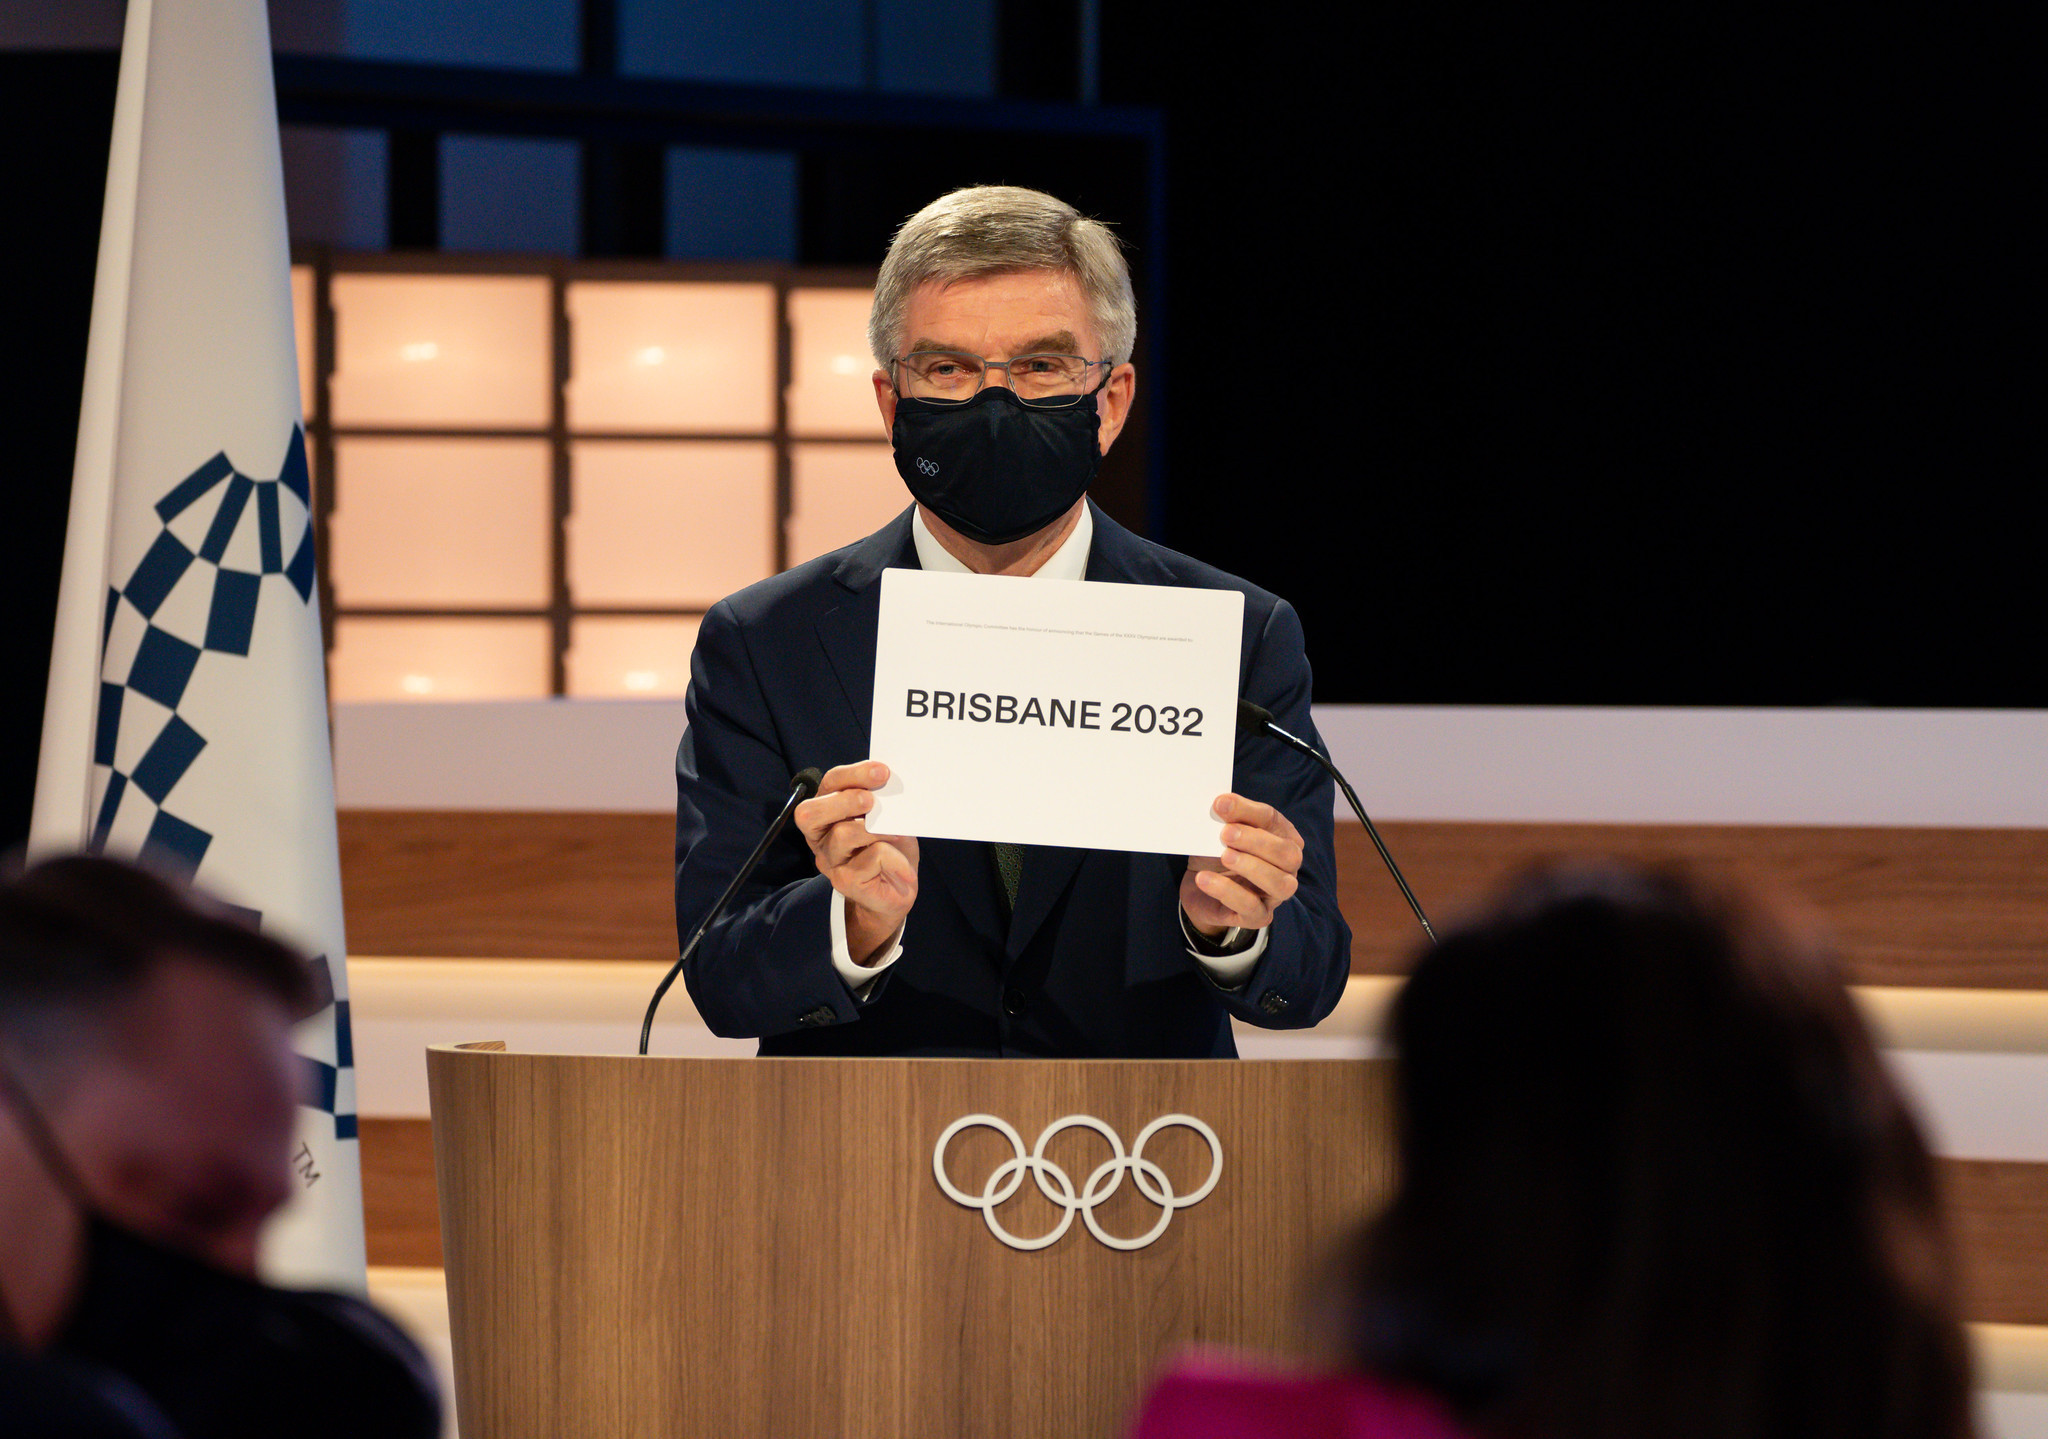 Brisbane secure 2032 Olympics and Paralympics as WHO backs Tokyo 2020